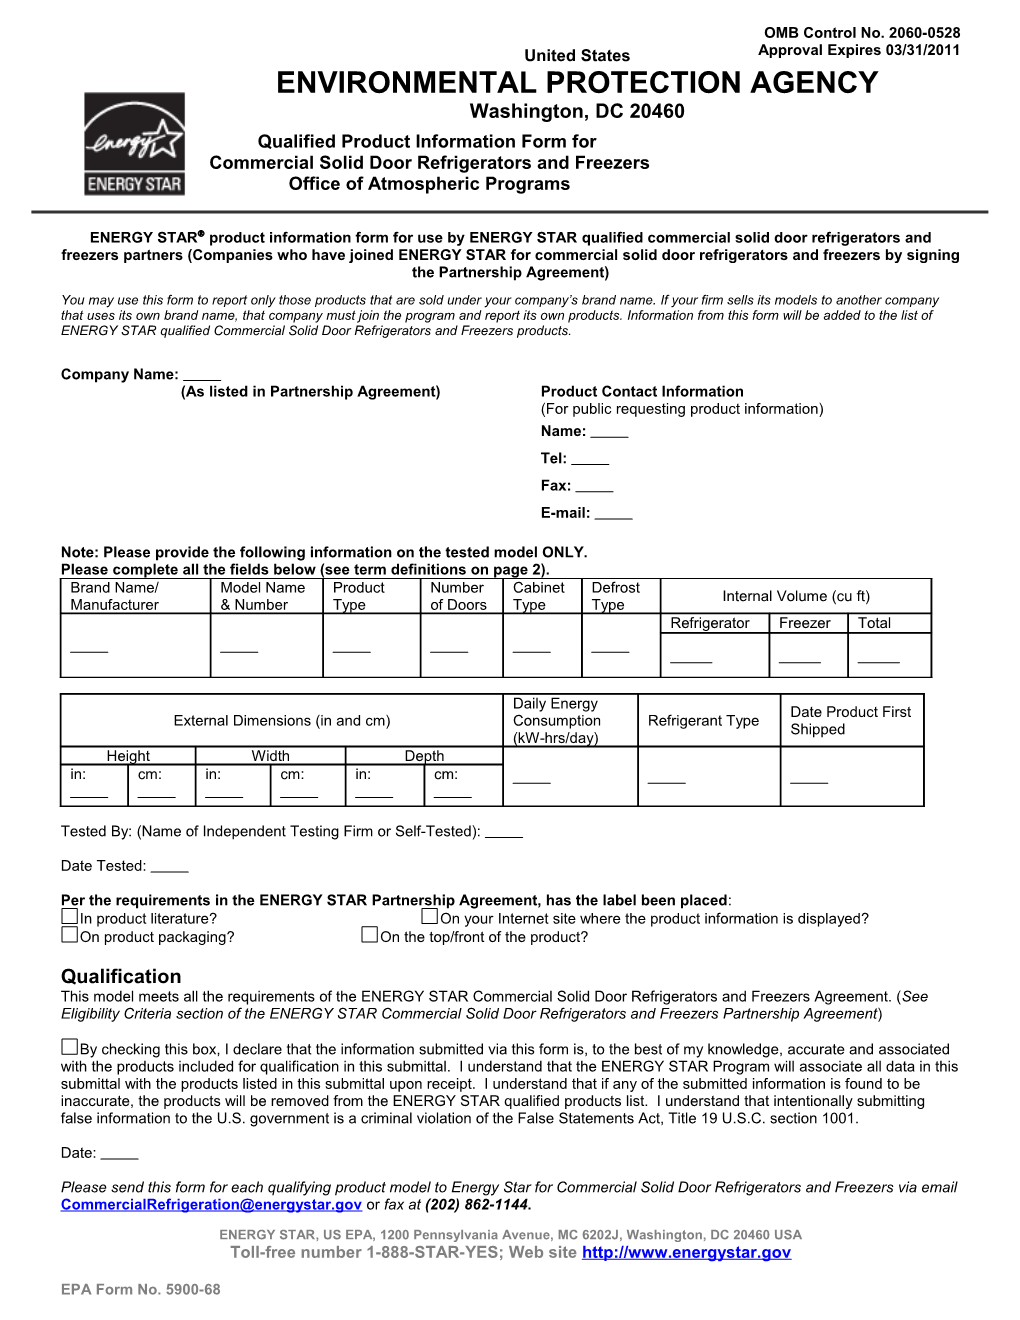 Qualified Product Information Form for Commercial Solid Door Refrigerators and Freezers